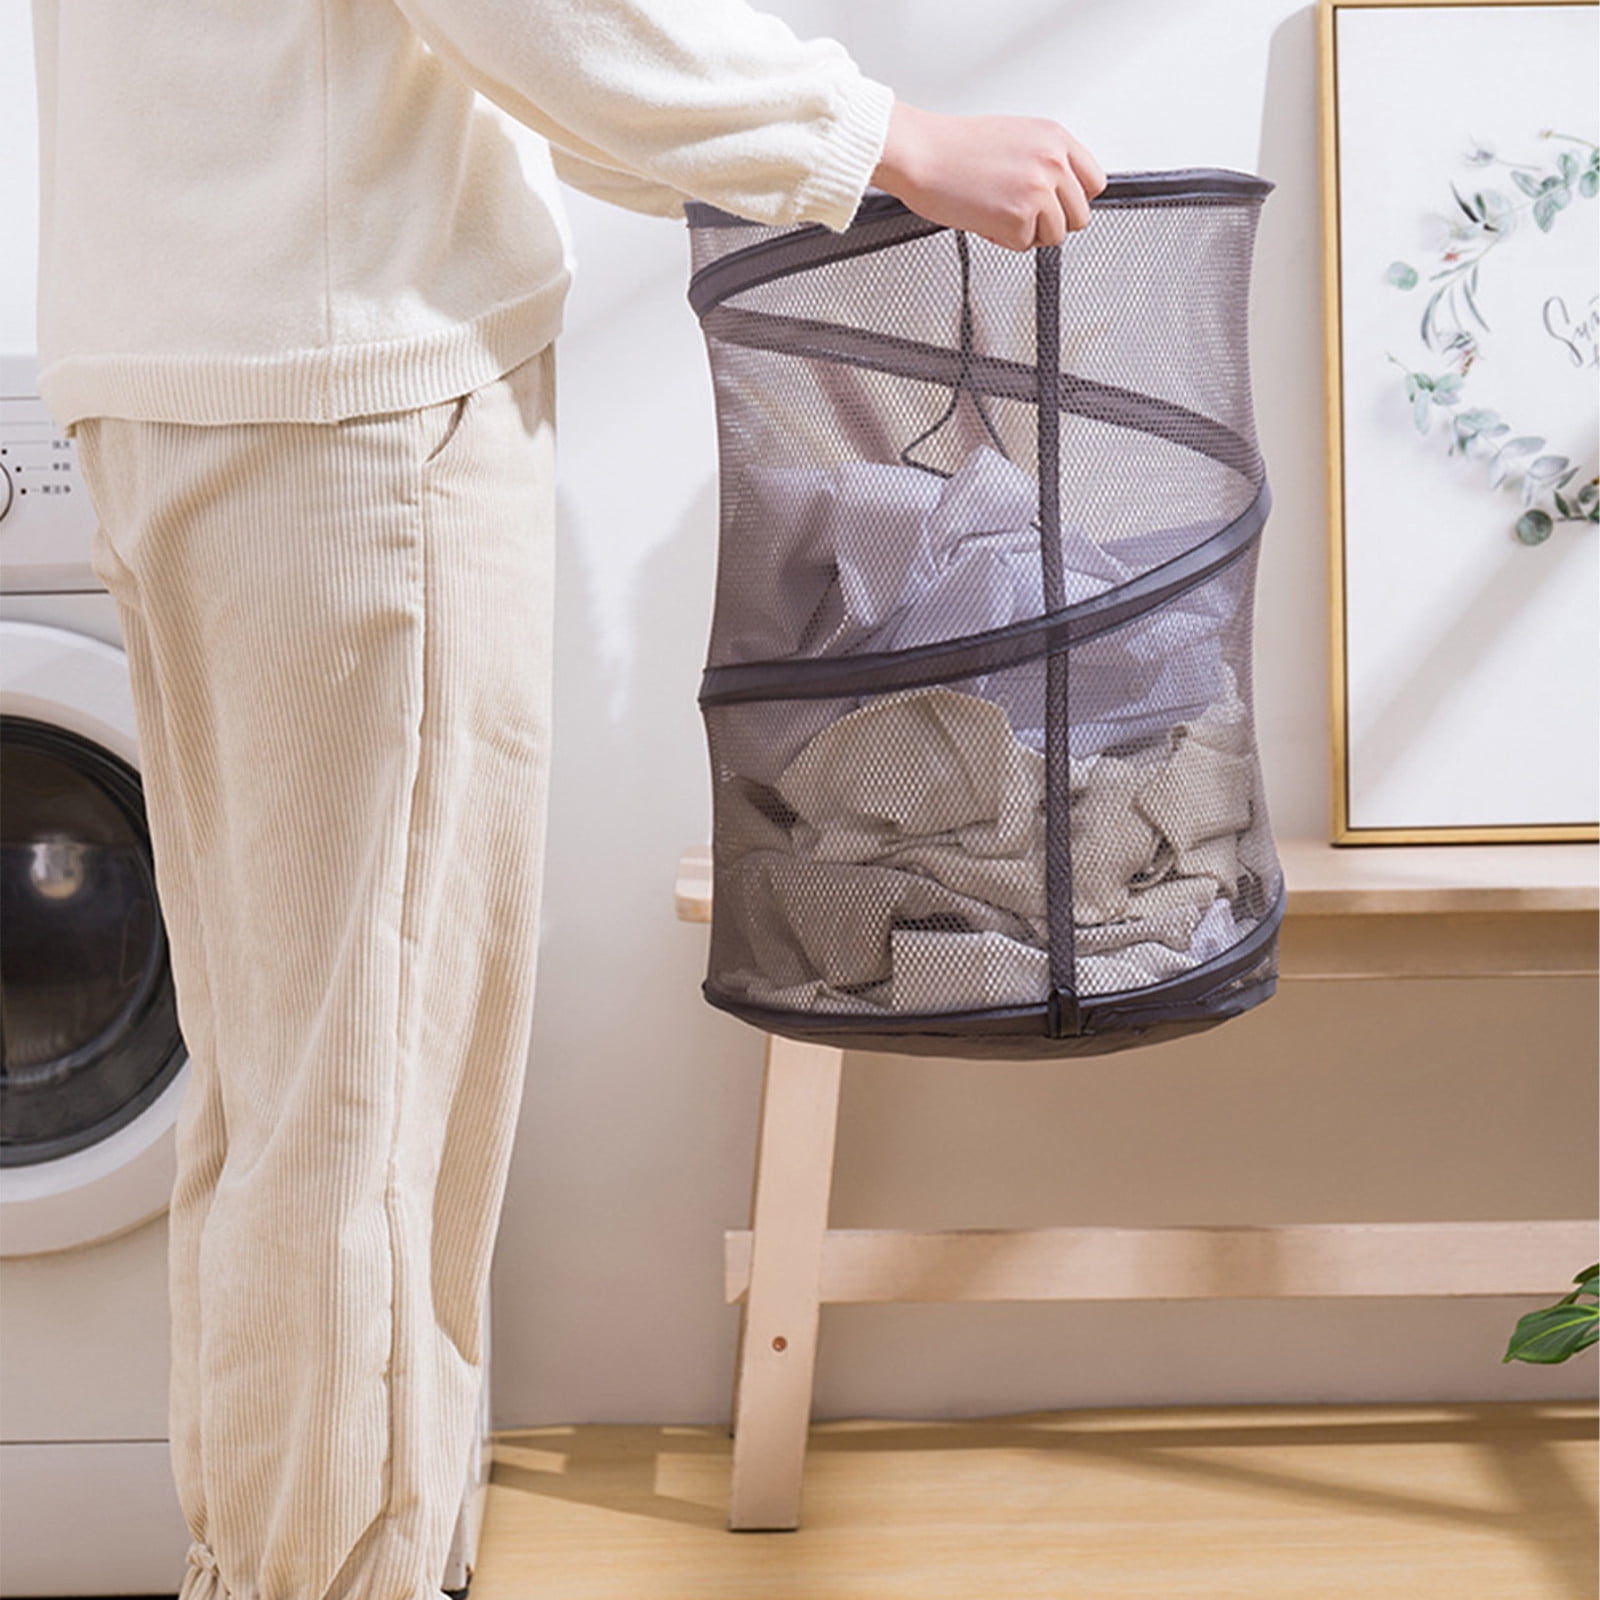 EGNMCR Laundry Bag Collapsible Mesh Popup Laundry Hamper, Foldable Dirty  Clothes Basket Collapsible Mesh Laundry Hamper, Great For Kid Room/College